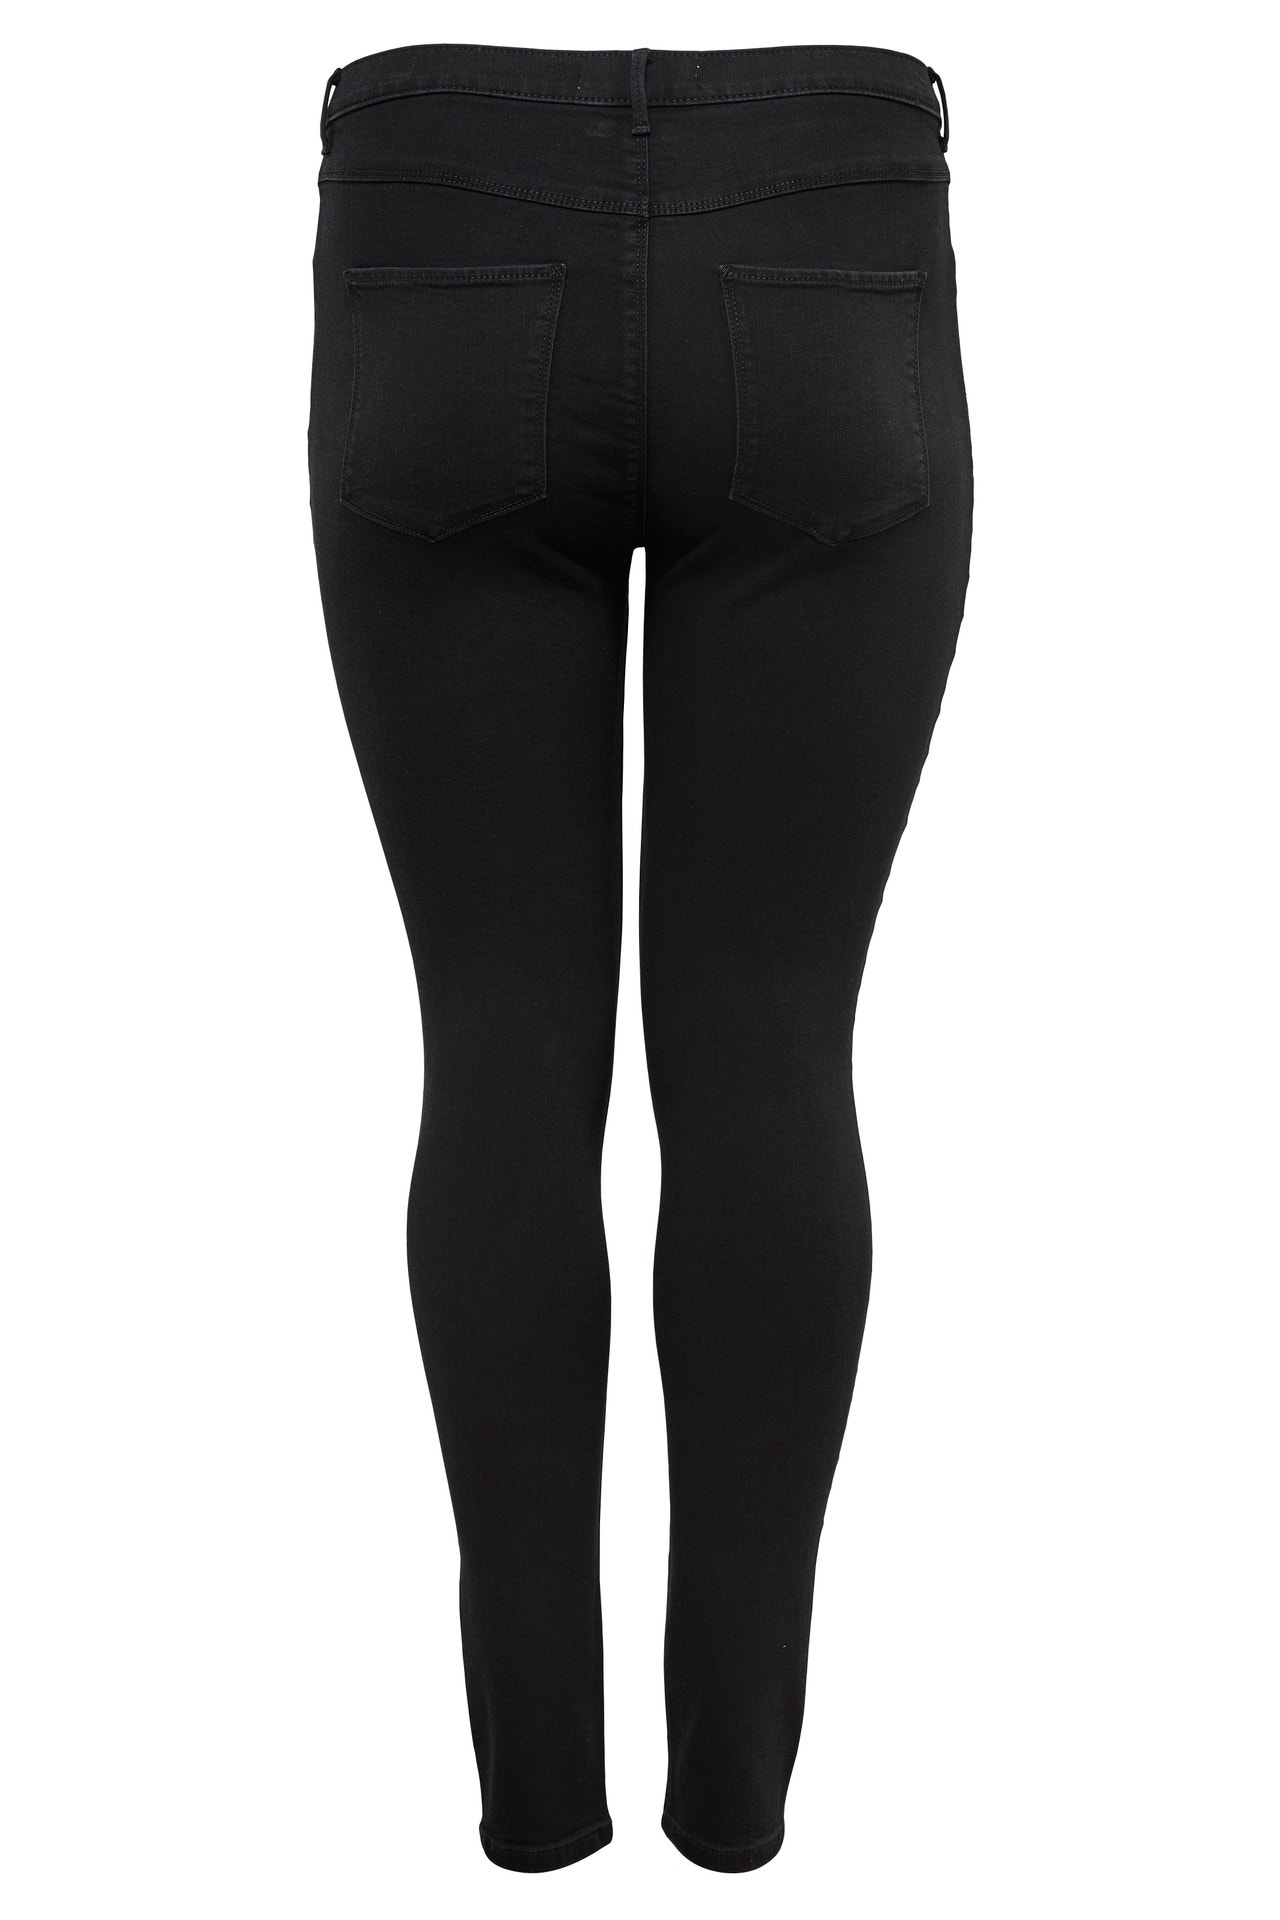 ONLY Skinny Fit High waist Jeans -Black - 15174946